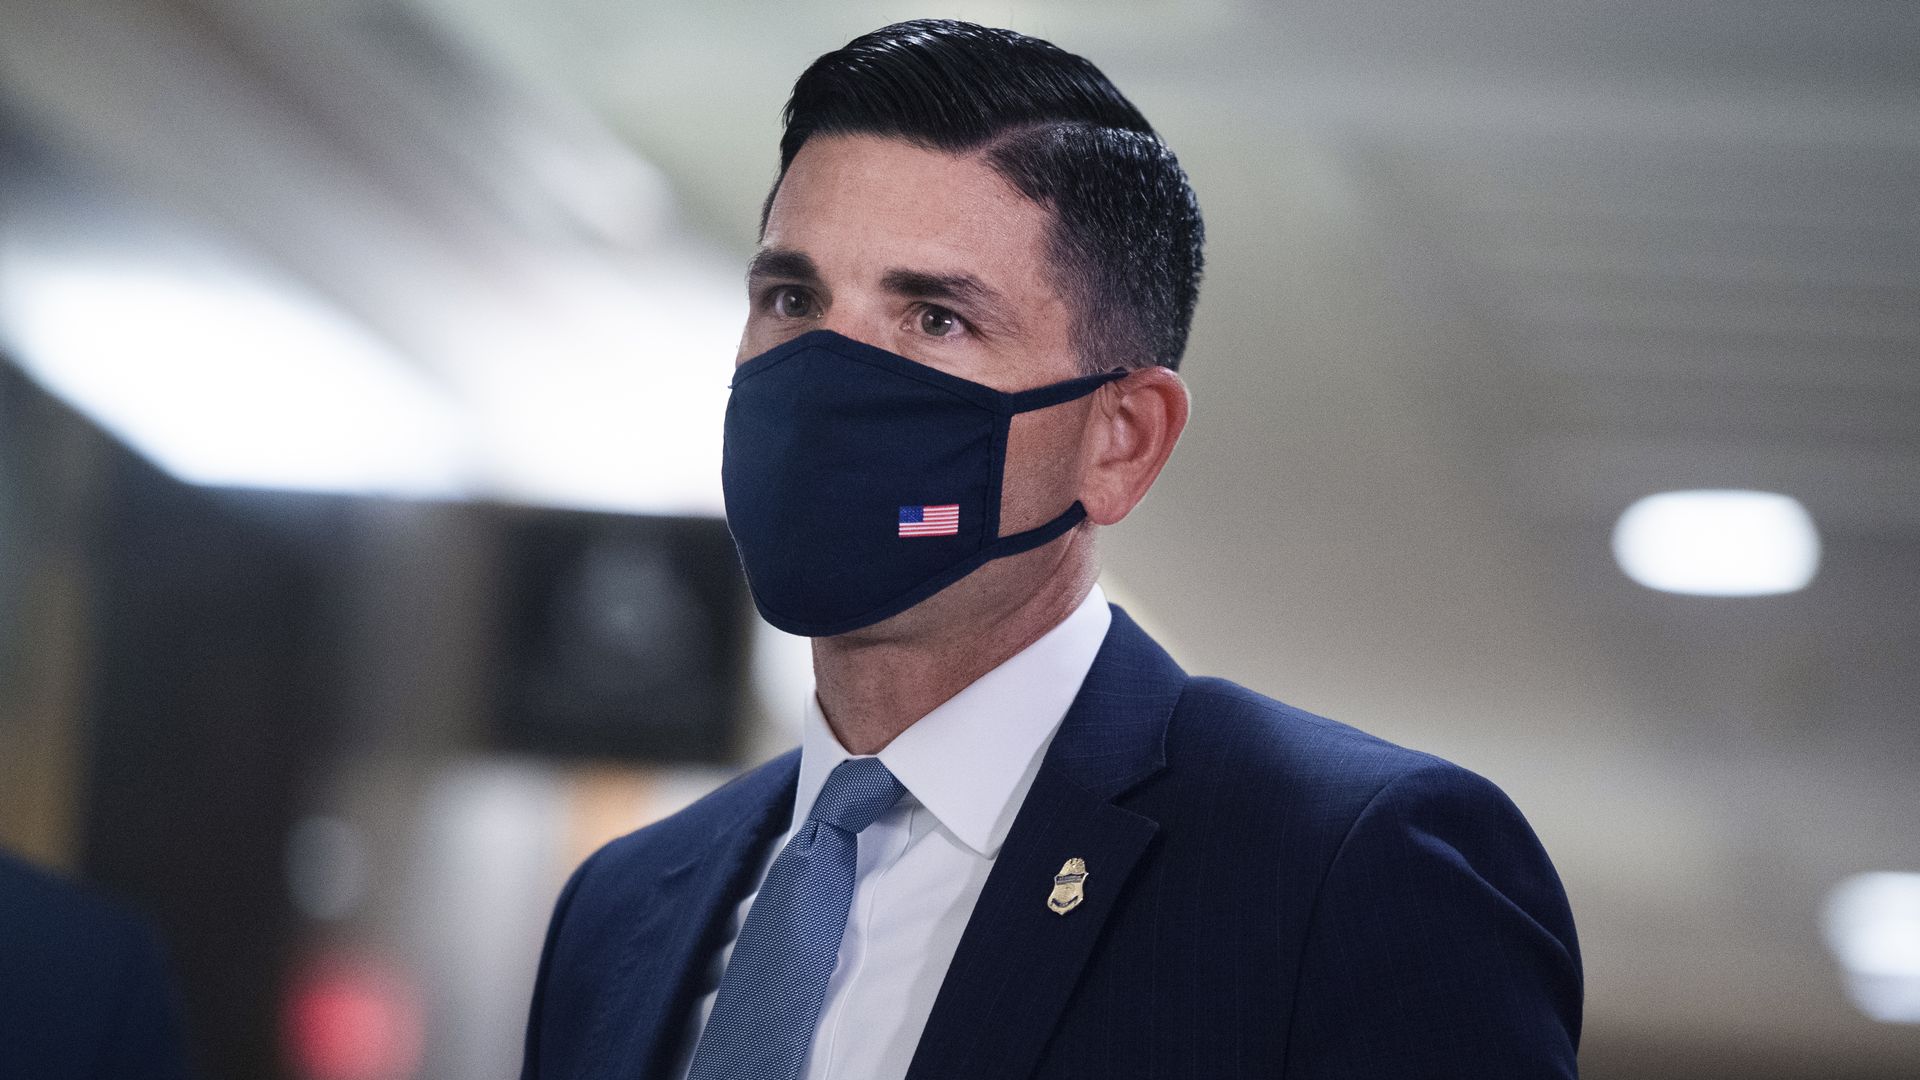 DHS Acting Secretary Chad Wolf in a mask